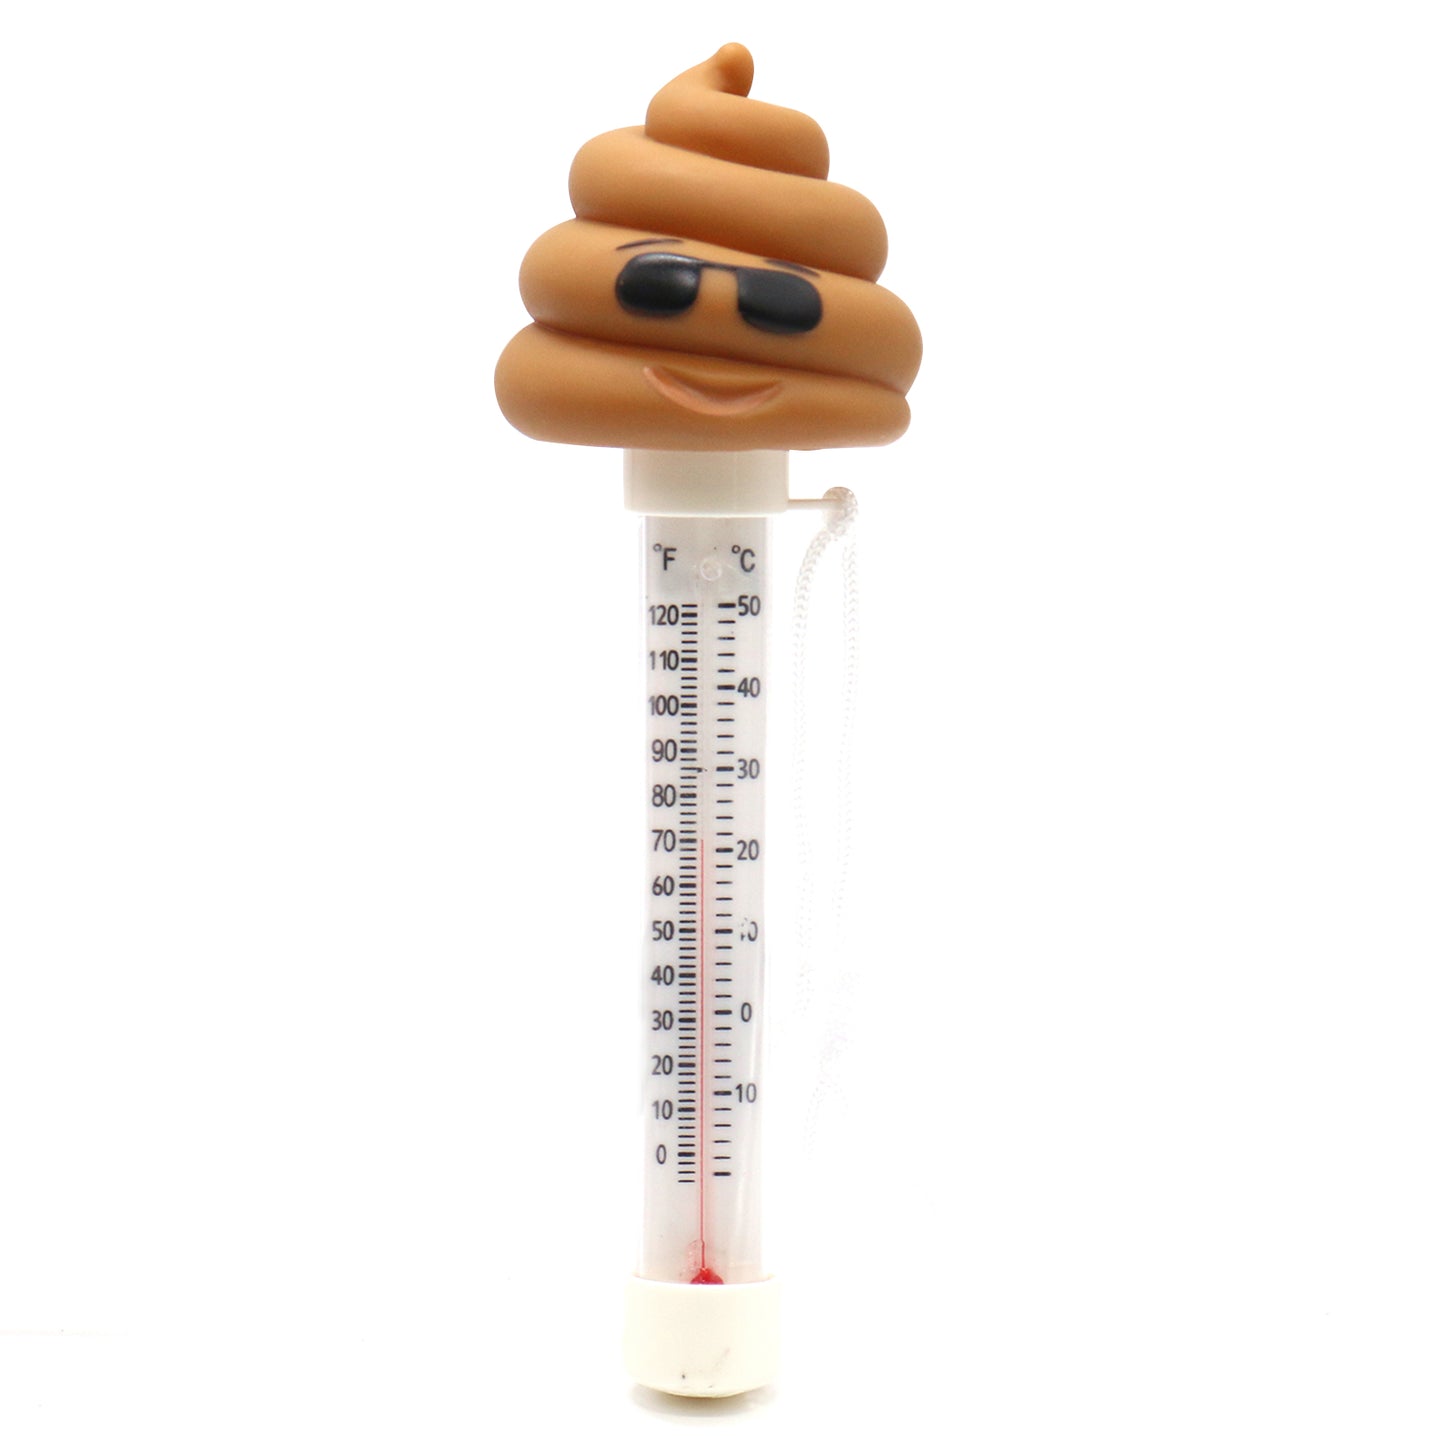 Poo Pool Thermometer